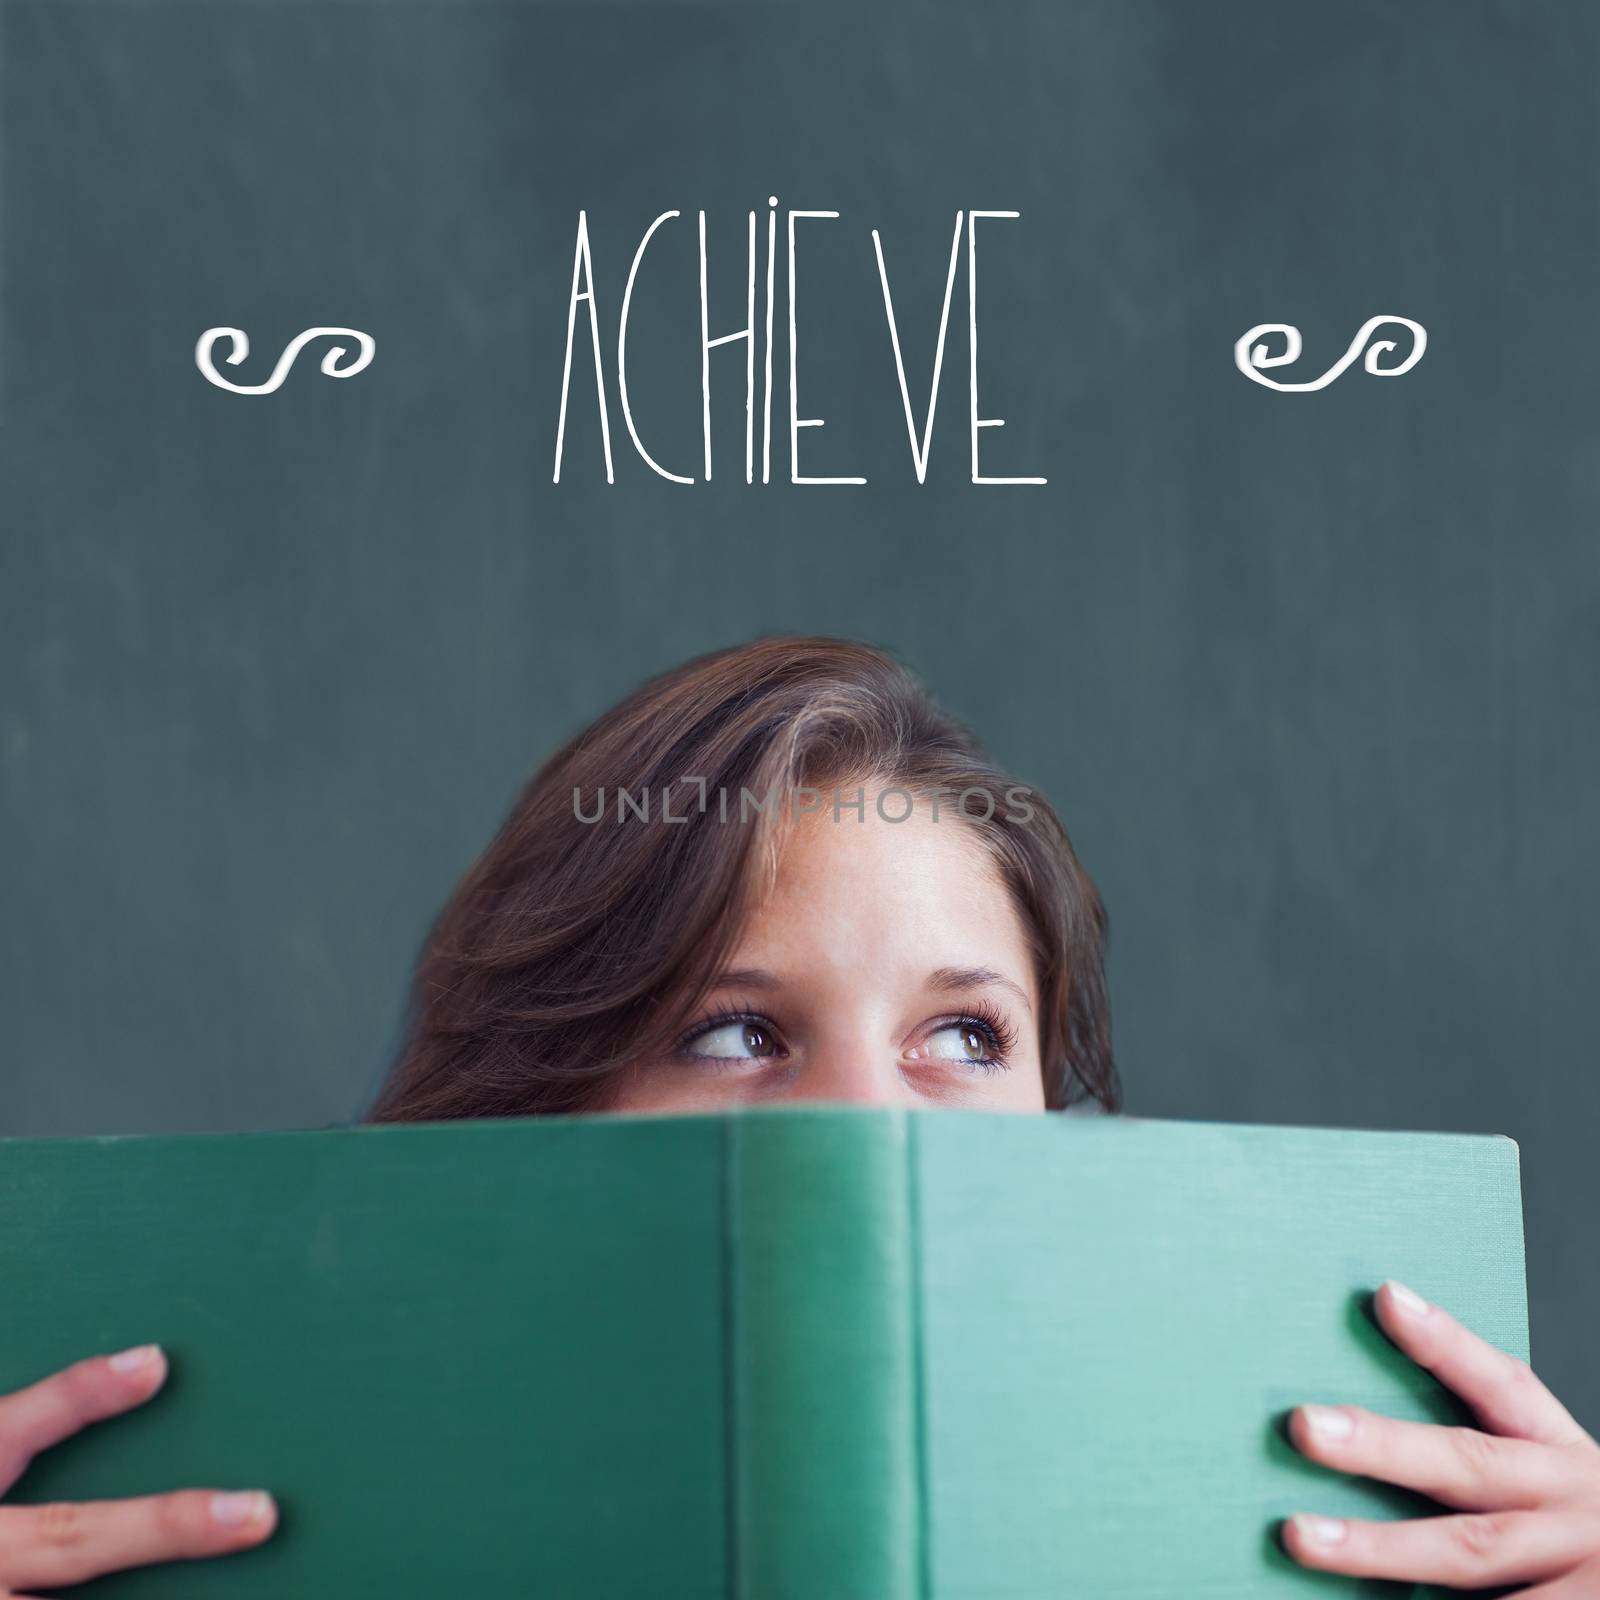 Achieve against student holding book by Wavebreakmedia